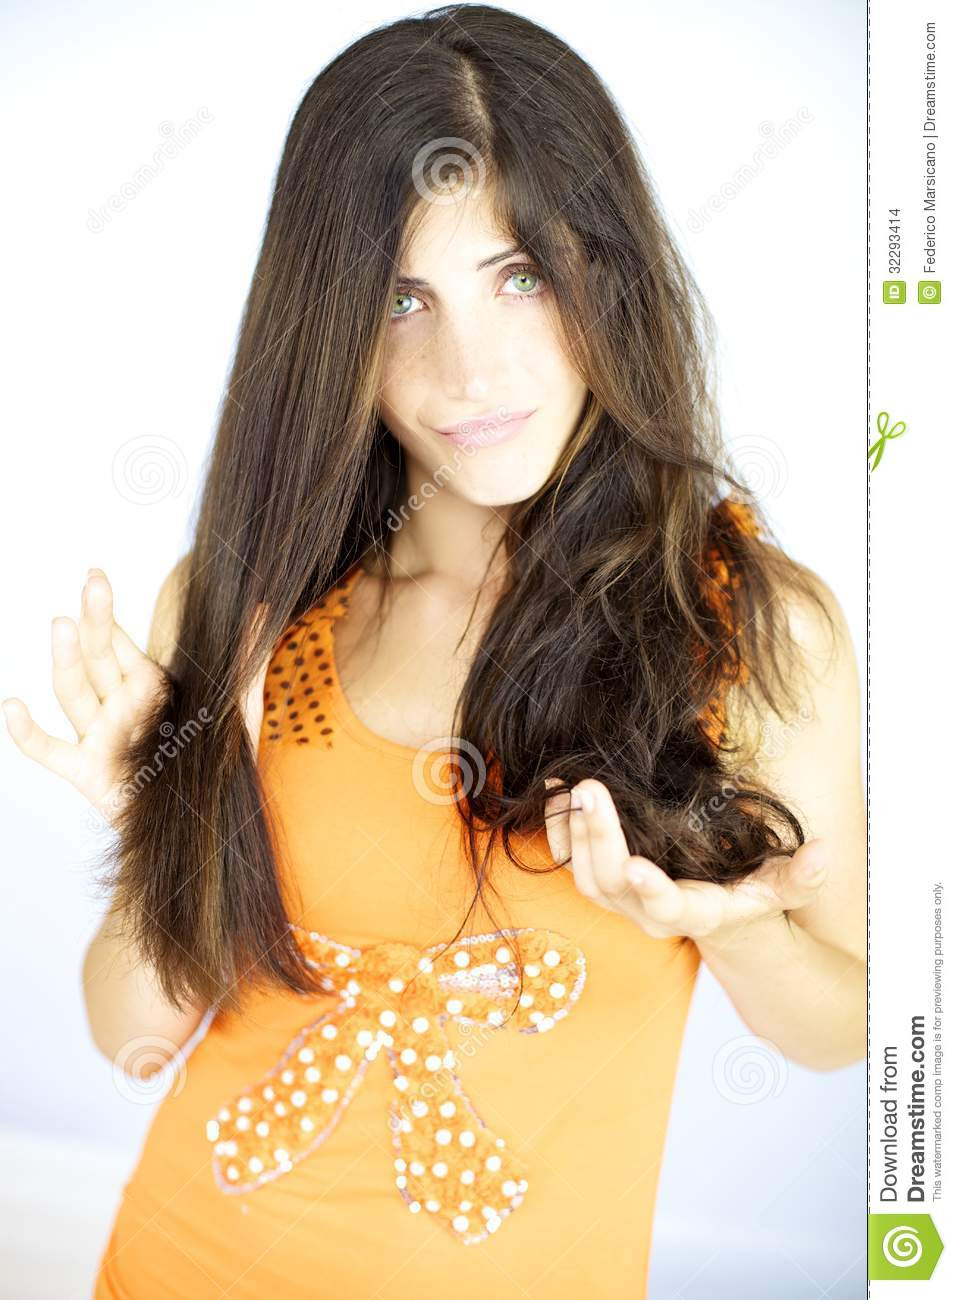 Half Curly Half Straight Hairstyles
 Woman Showing Half Head With Straight Hair The Other Half